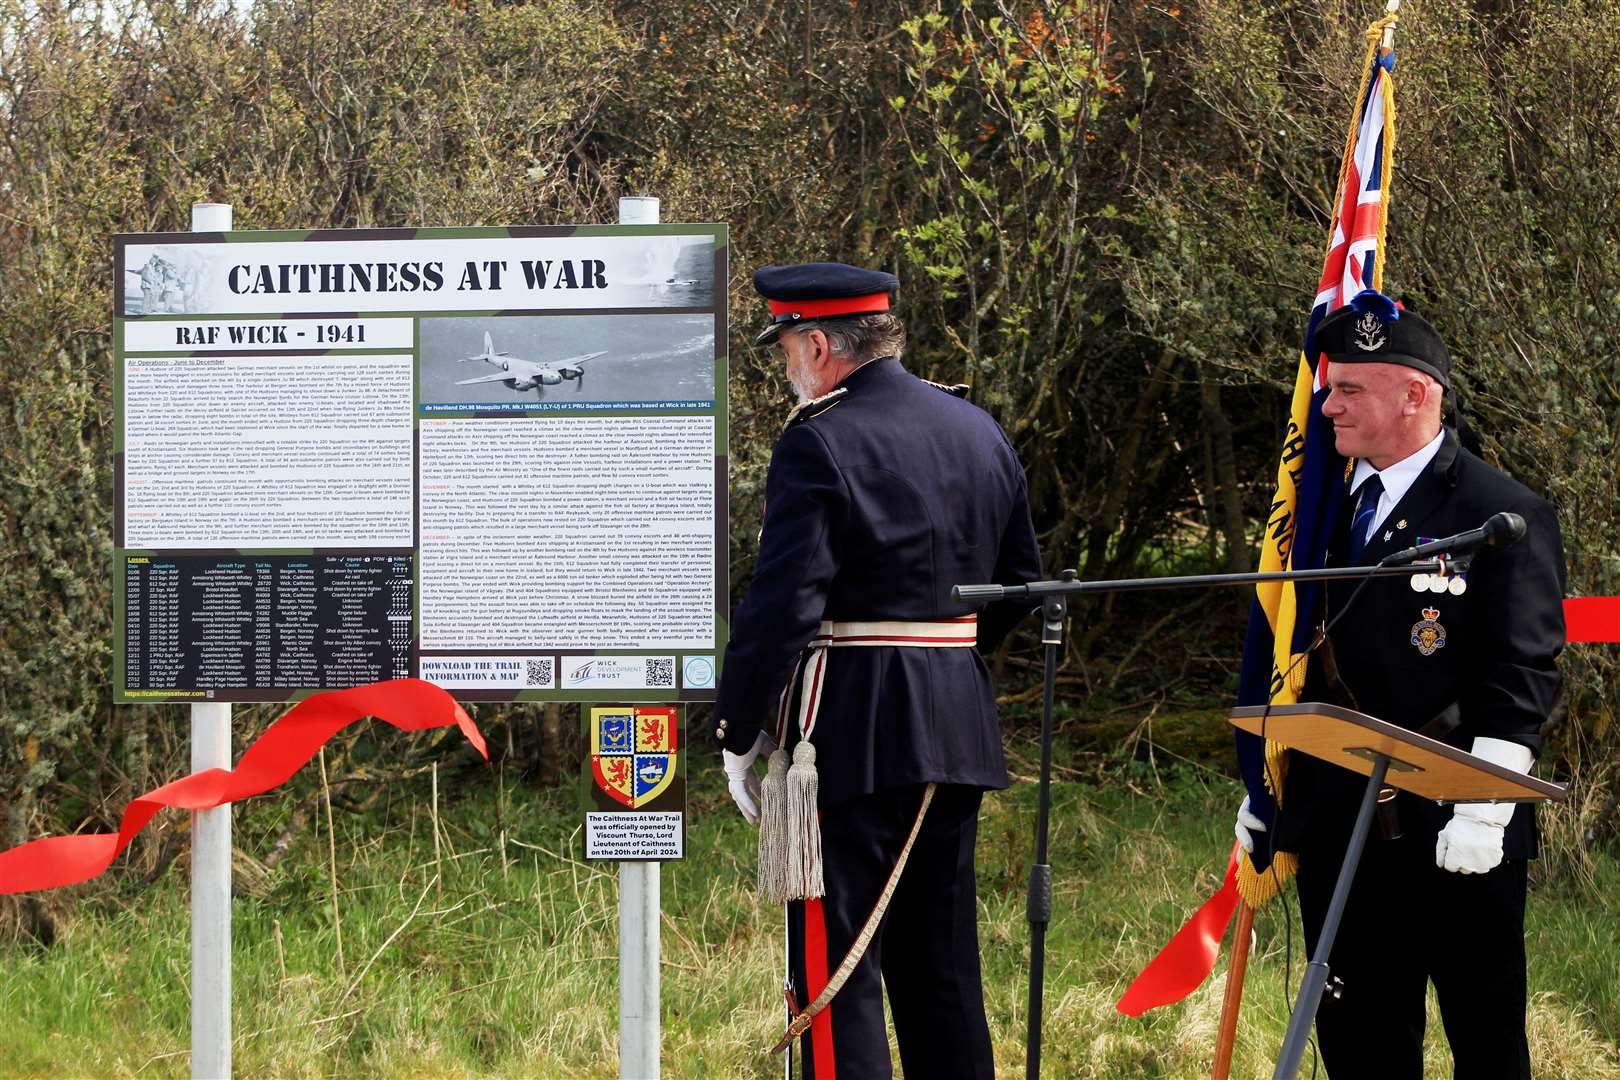 Lord Thurso, the Lord-Lieutenant of Caithness, cuts the ribbon to officially open the Caithness At War heritage trail. Picture: Alan Hendry